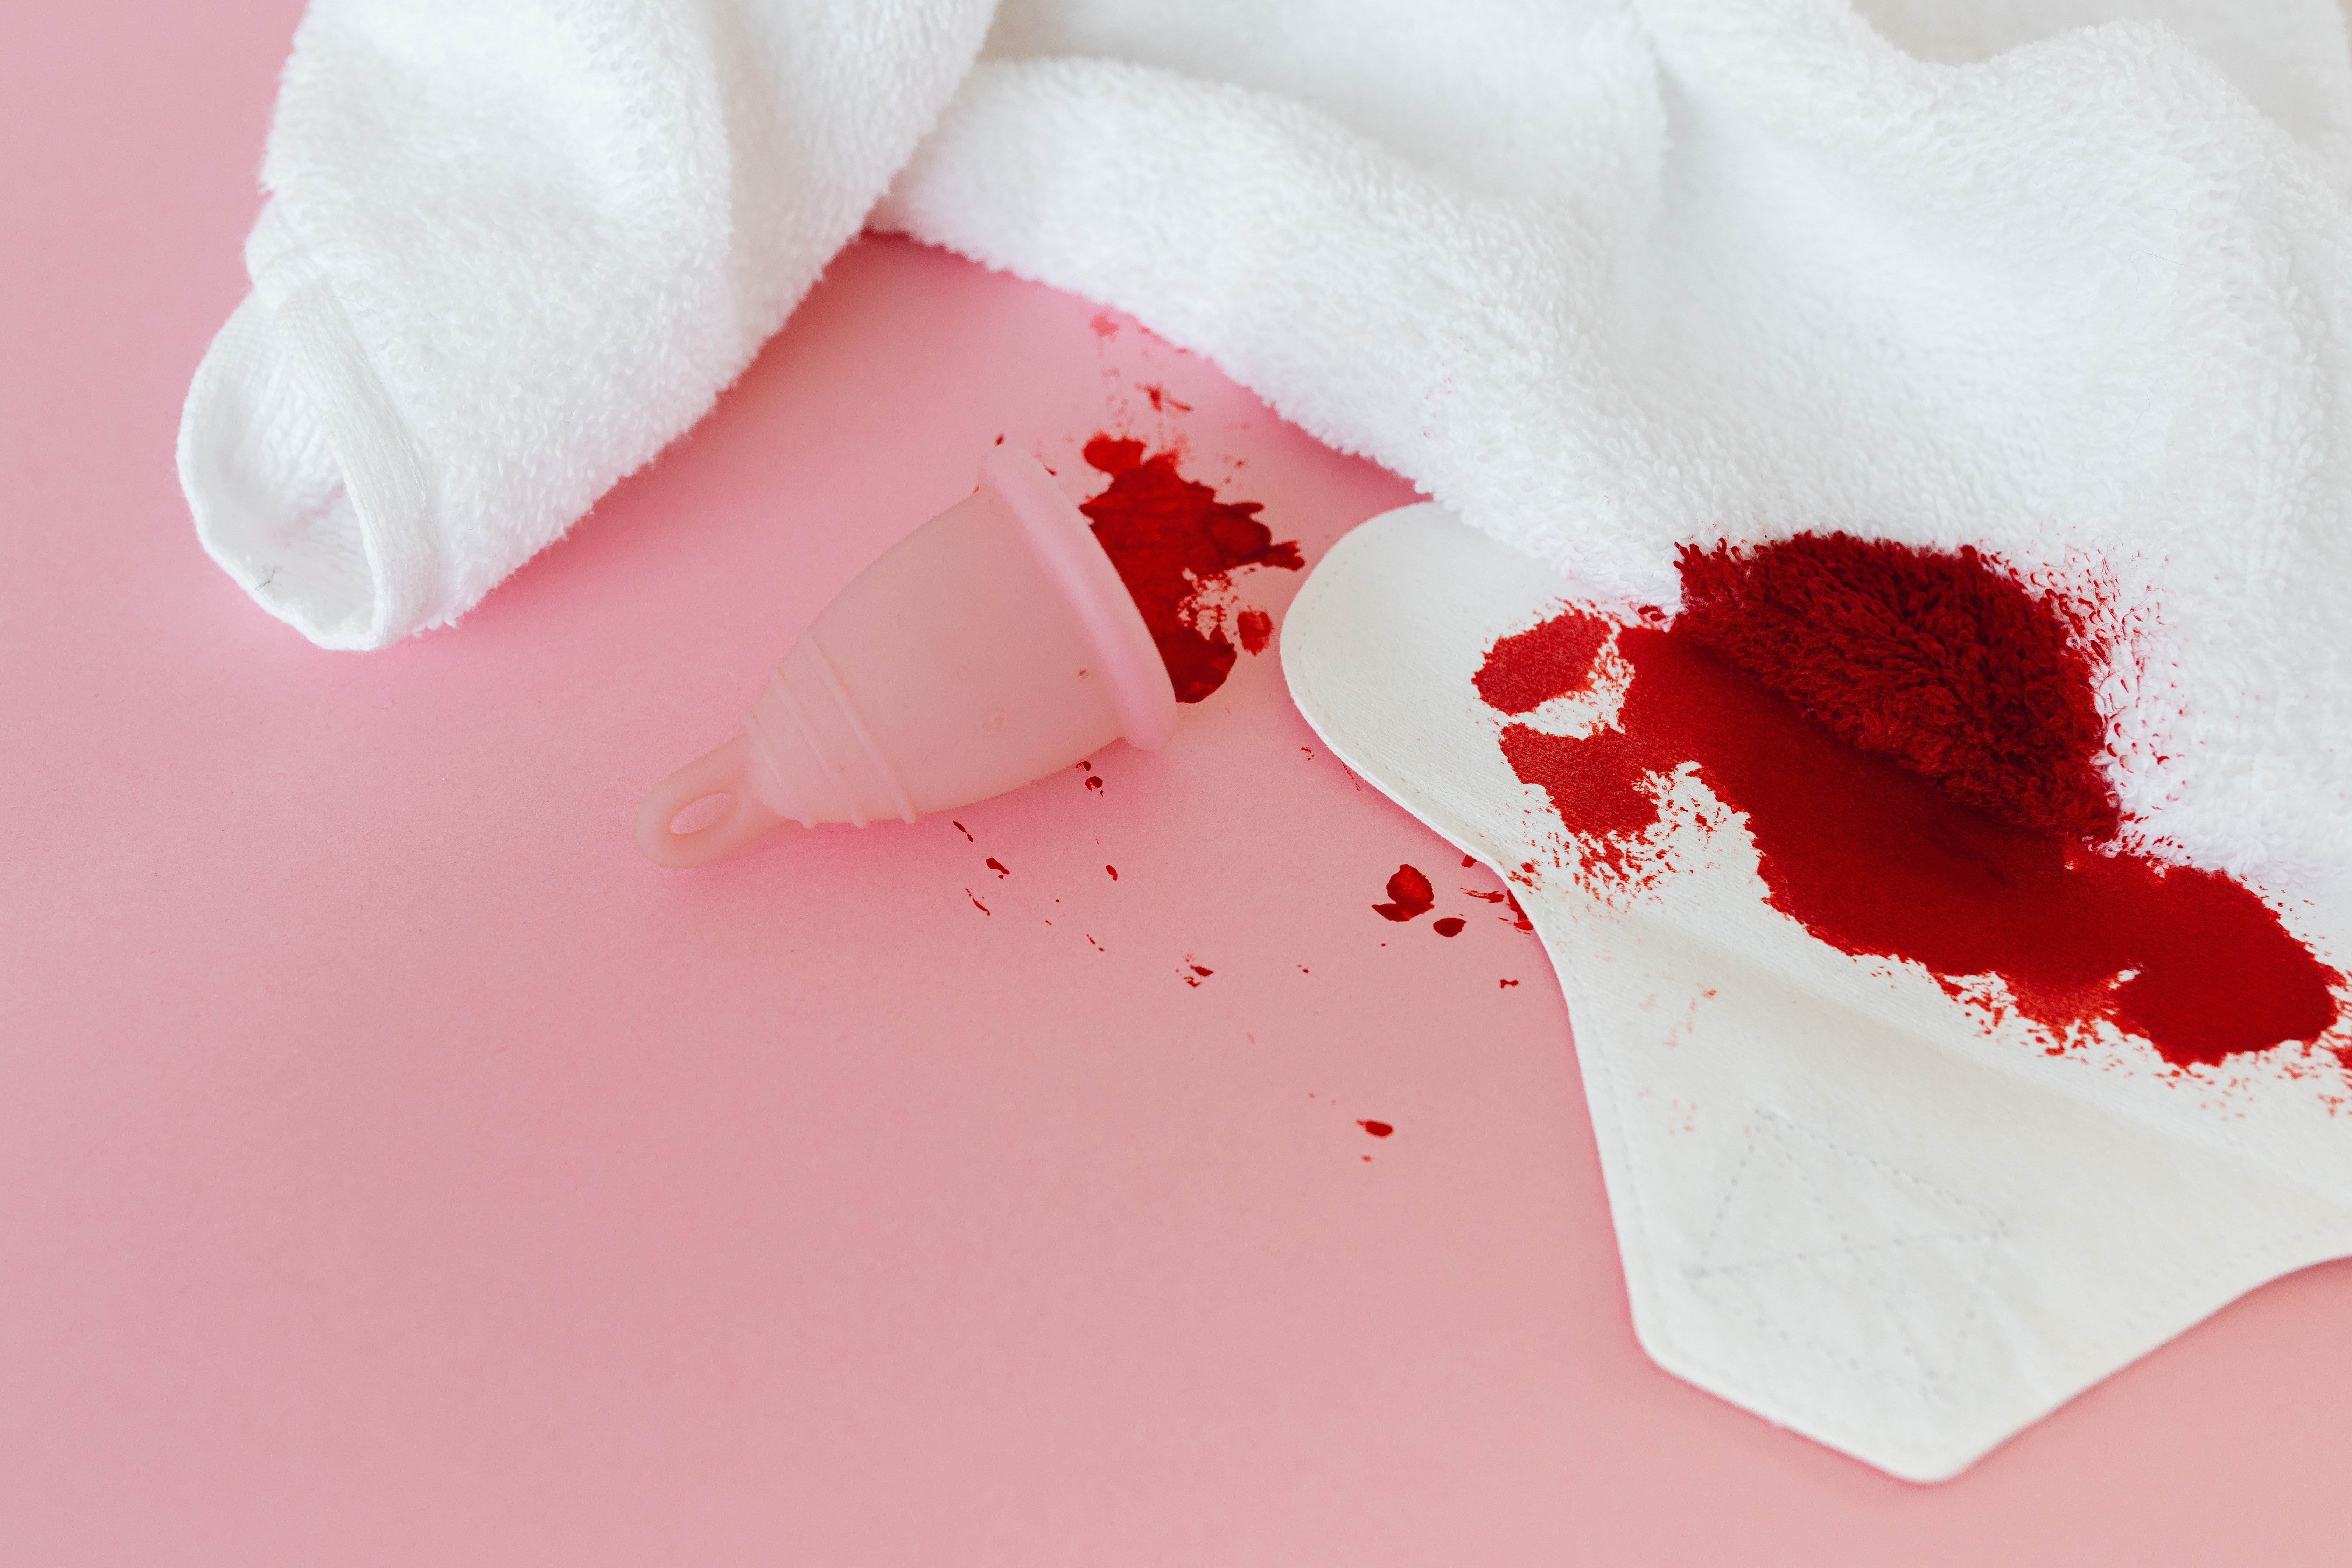 A towel with red blood on it - Blood